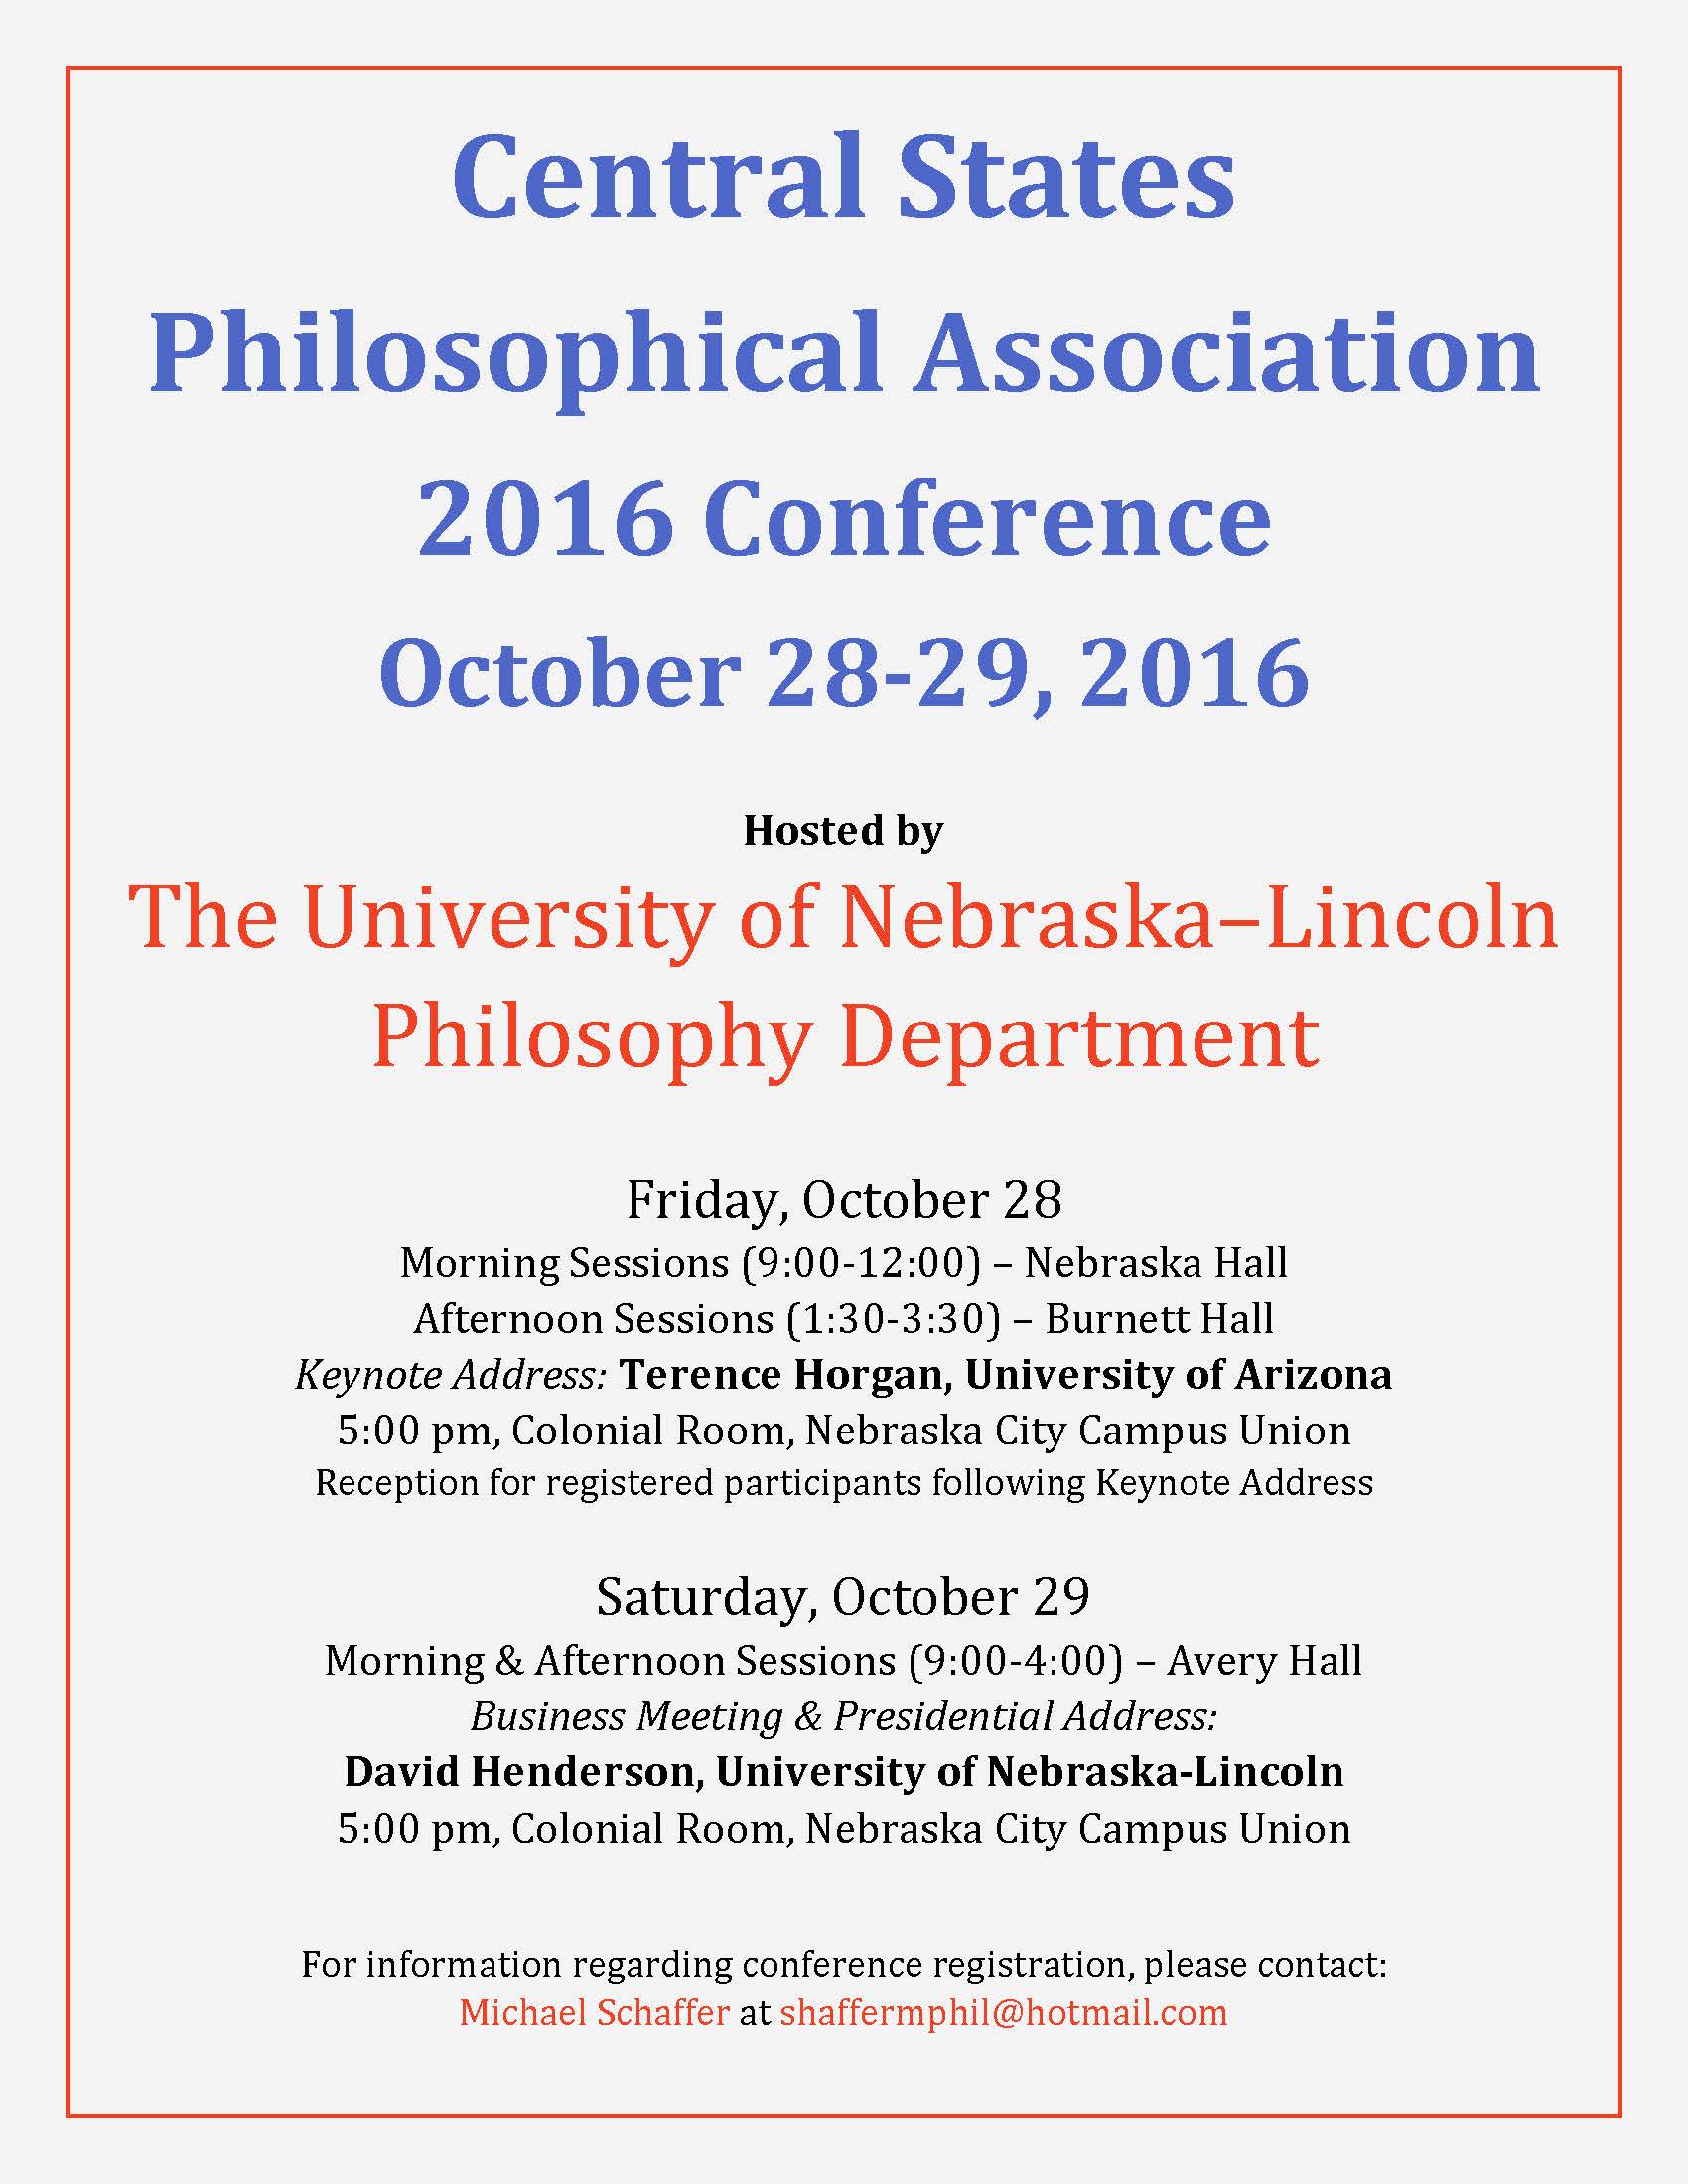 Photo Credit: Central States Philosophical Association 2016 Poster